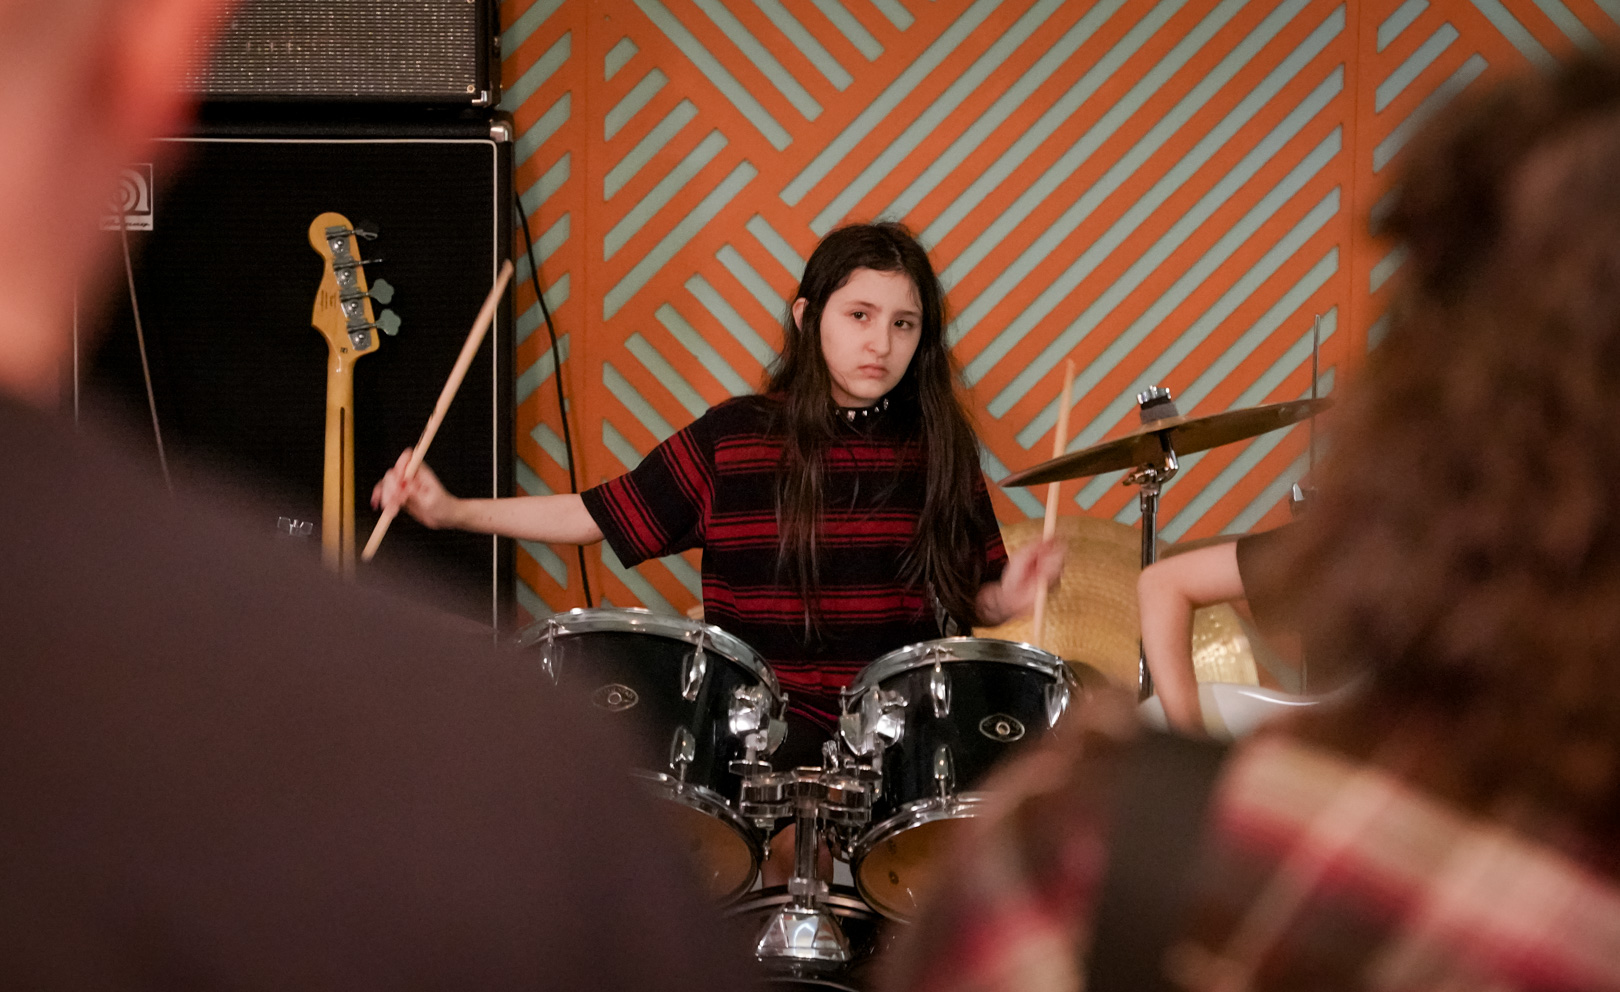 A young girl playing drums